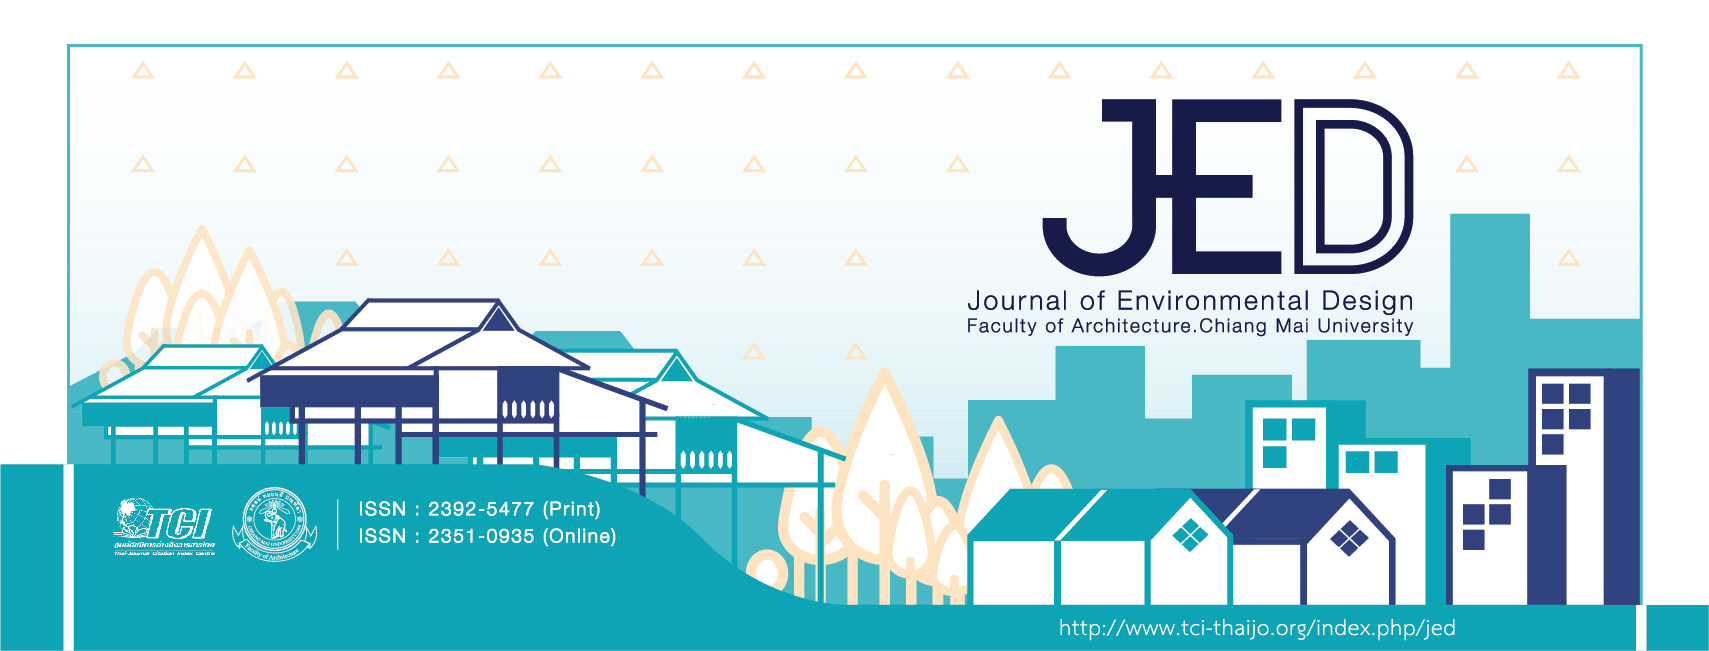 JED: Journal of Environmental Design